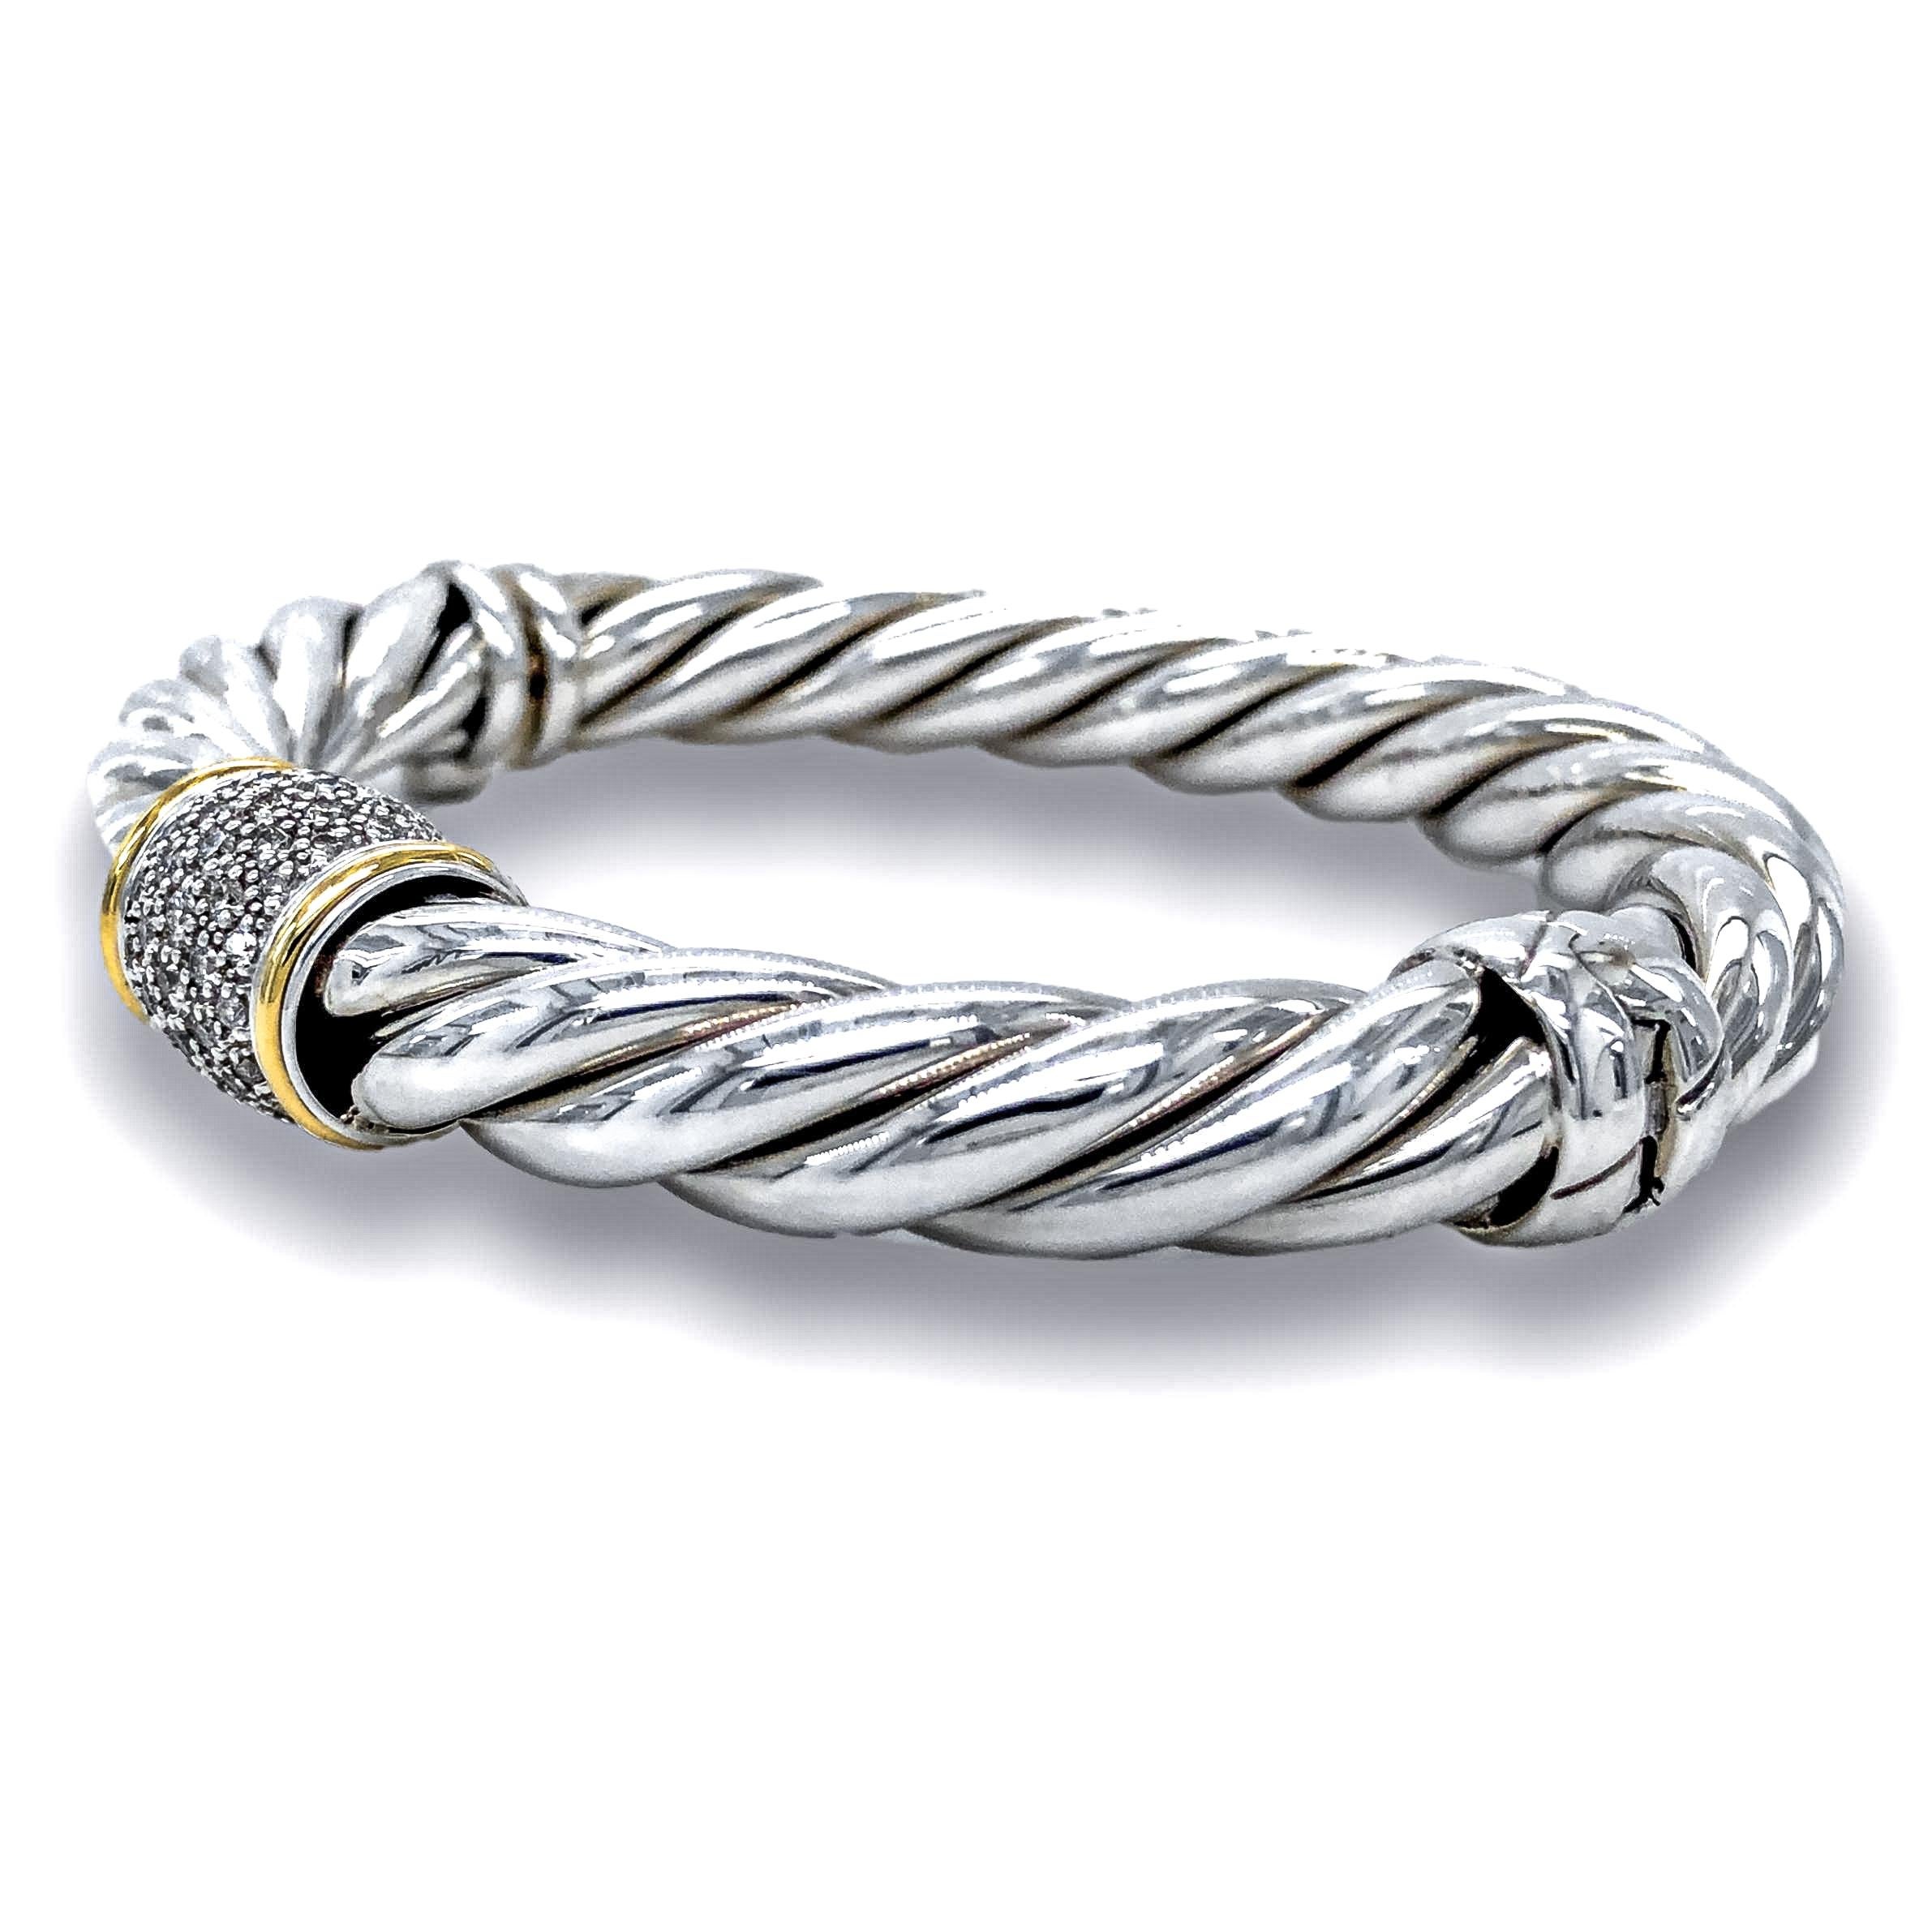 Vintage David Yurman Wide two tone bangle bracelet from the cable classics collection finely crafted in sterling silver featuring a station of pave set round brilliant cut diamonds weighing 0.25 cts total weight approximately inside 2 strip details